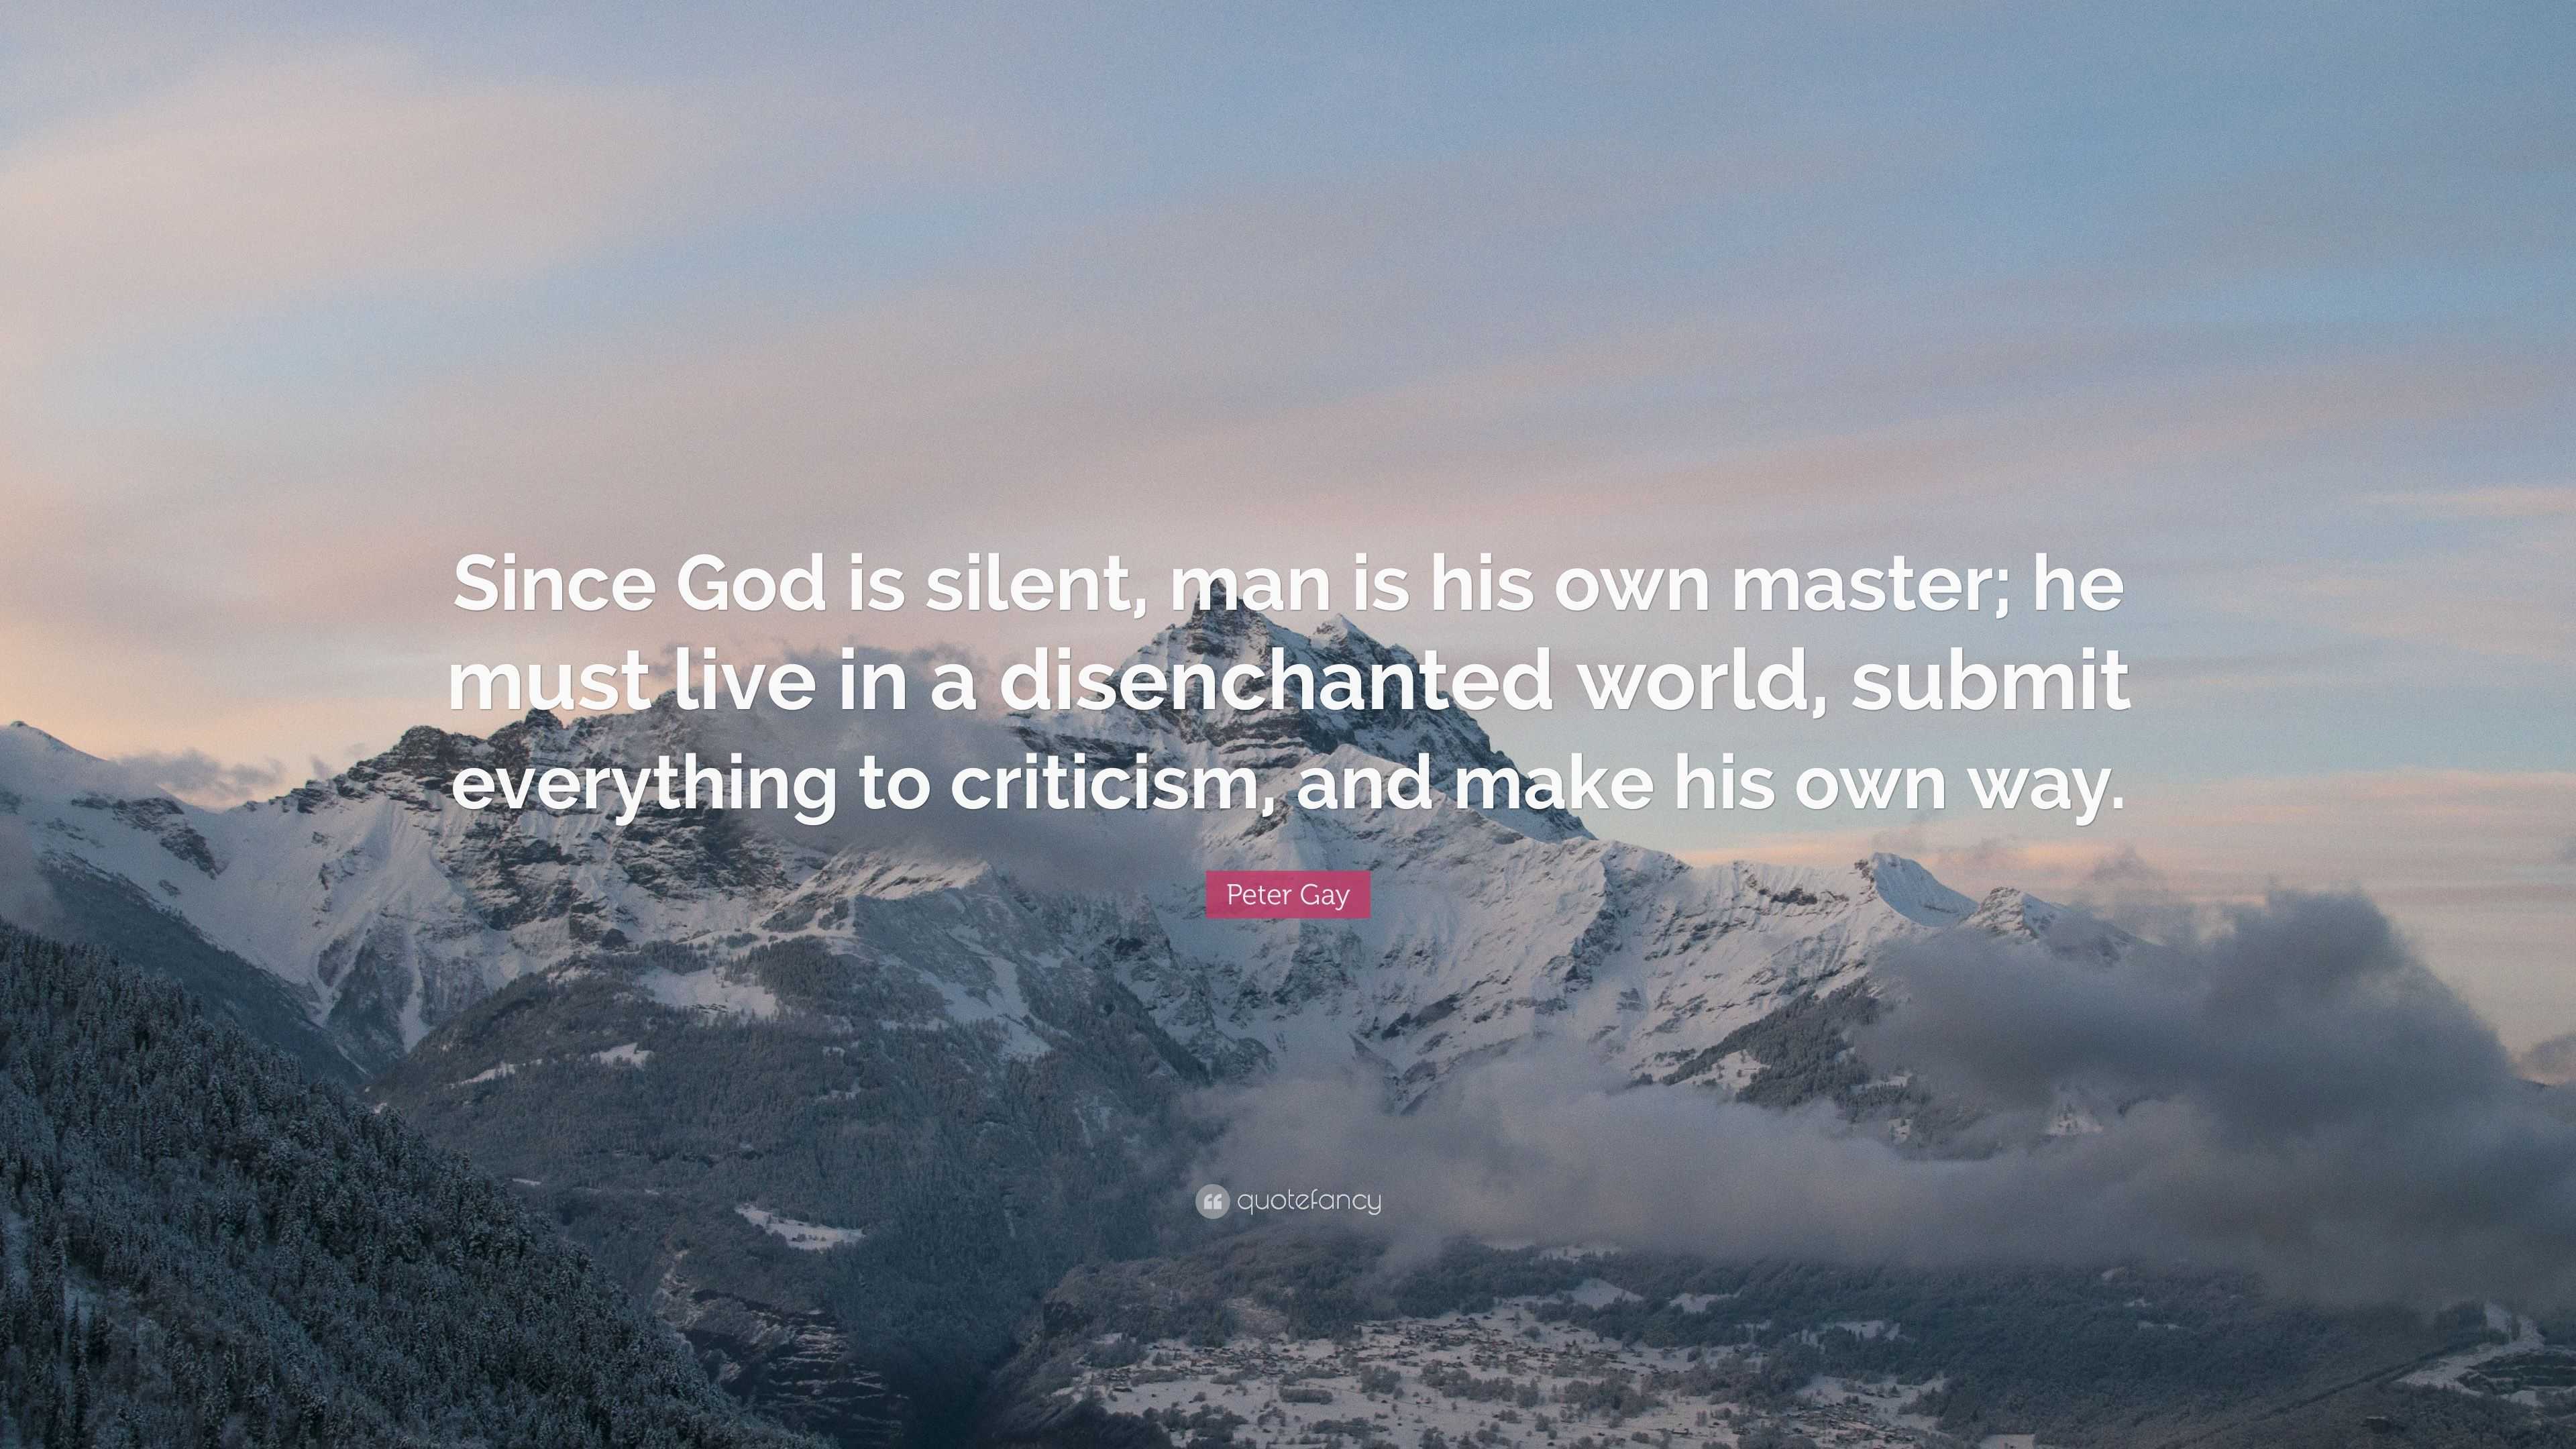 Peter Gay Quote: “Since God is silent, man is his own master; he ...